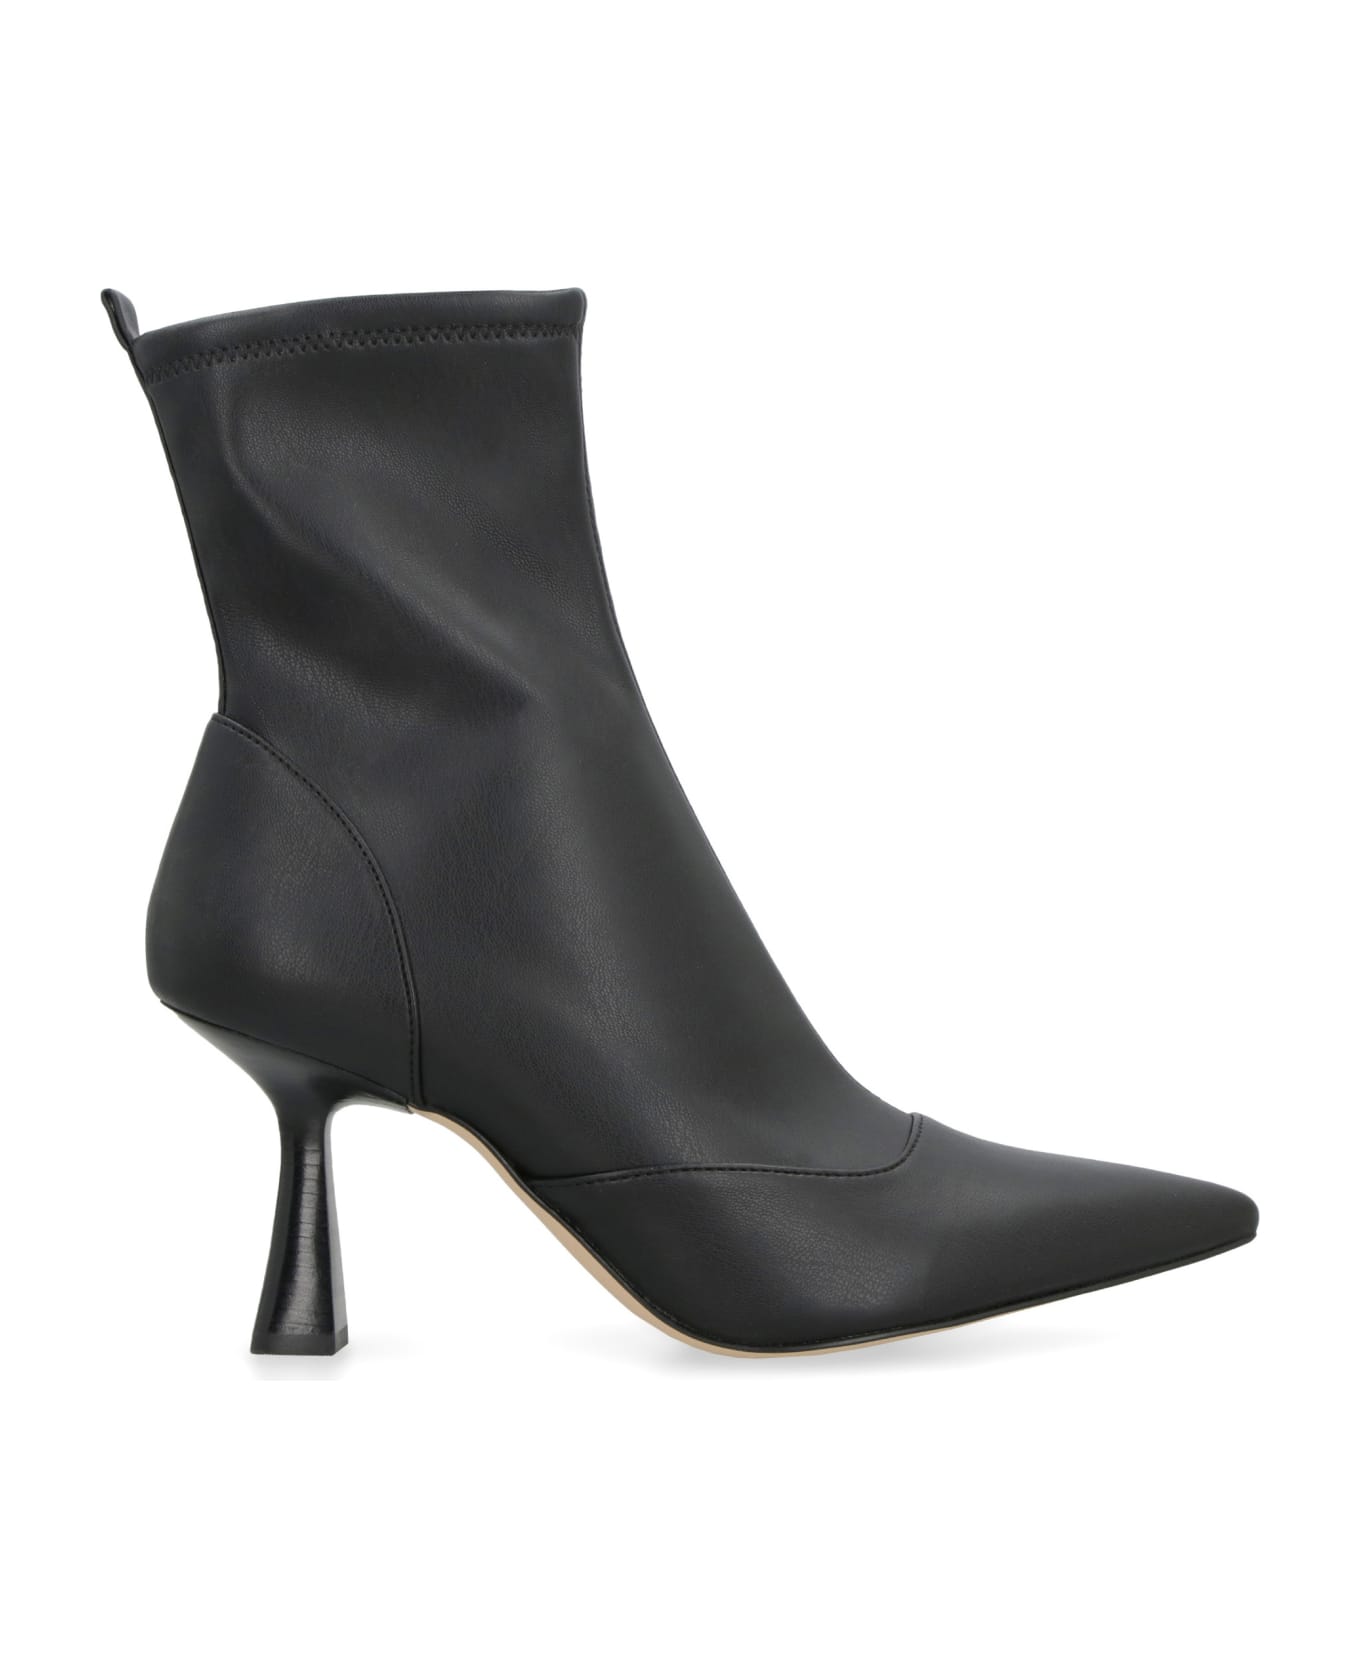 Michael Kors Clara Faux Leather Ankle Boots - Black ブーツ